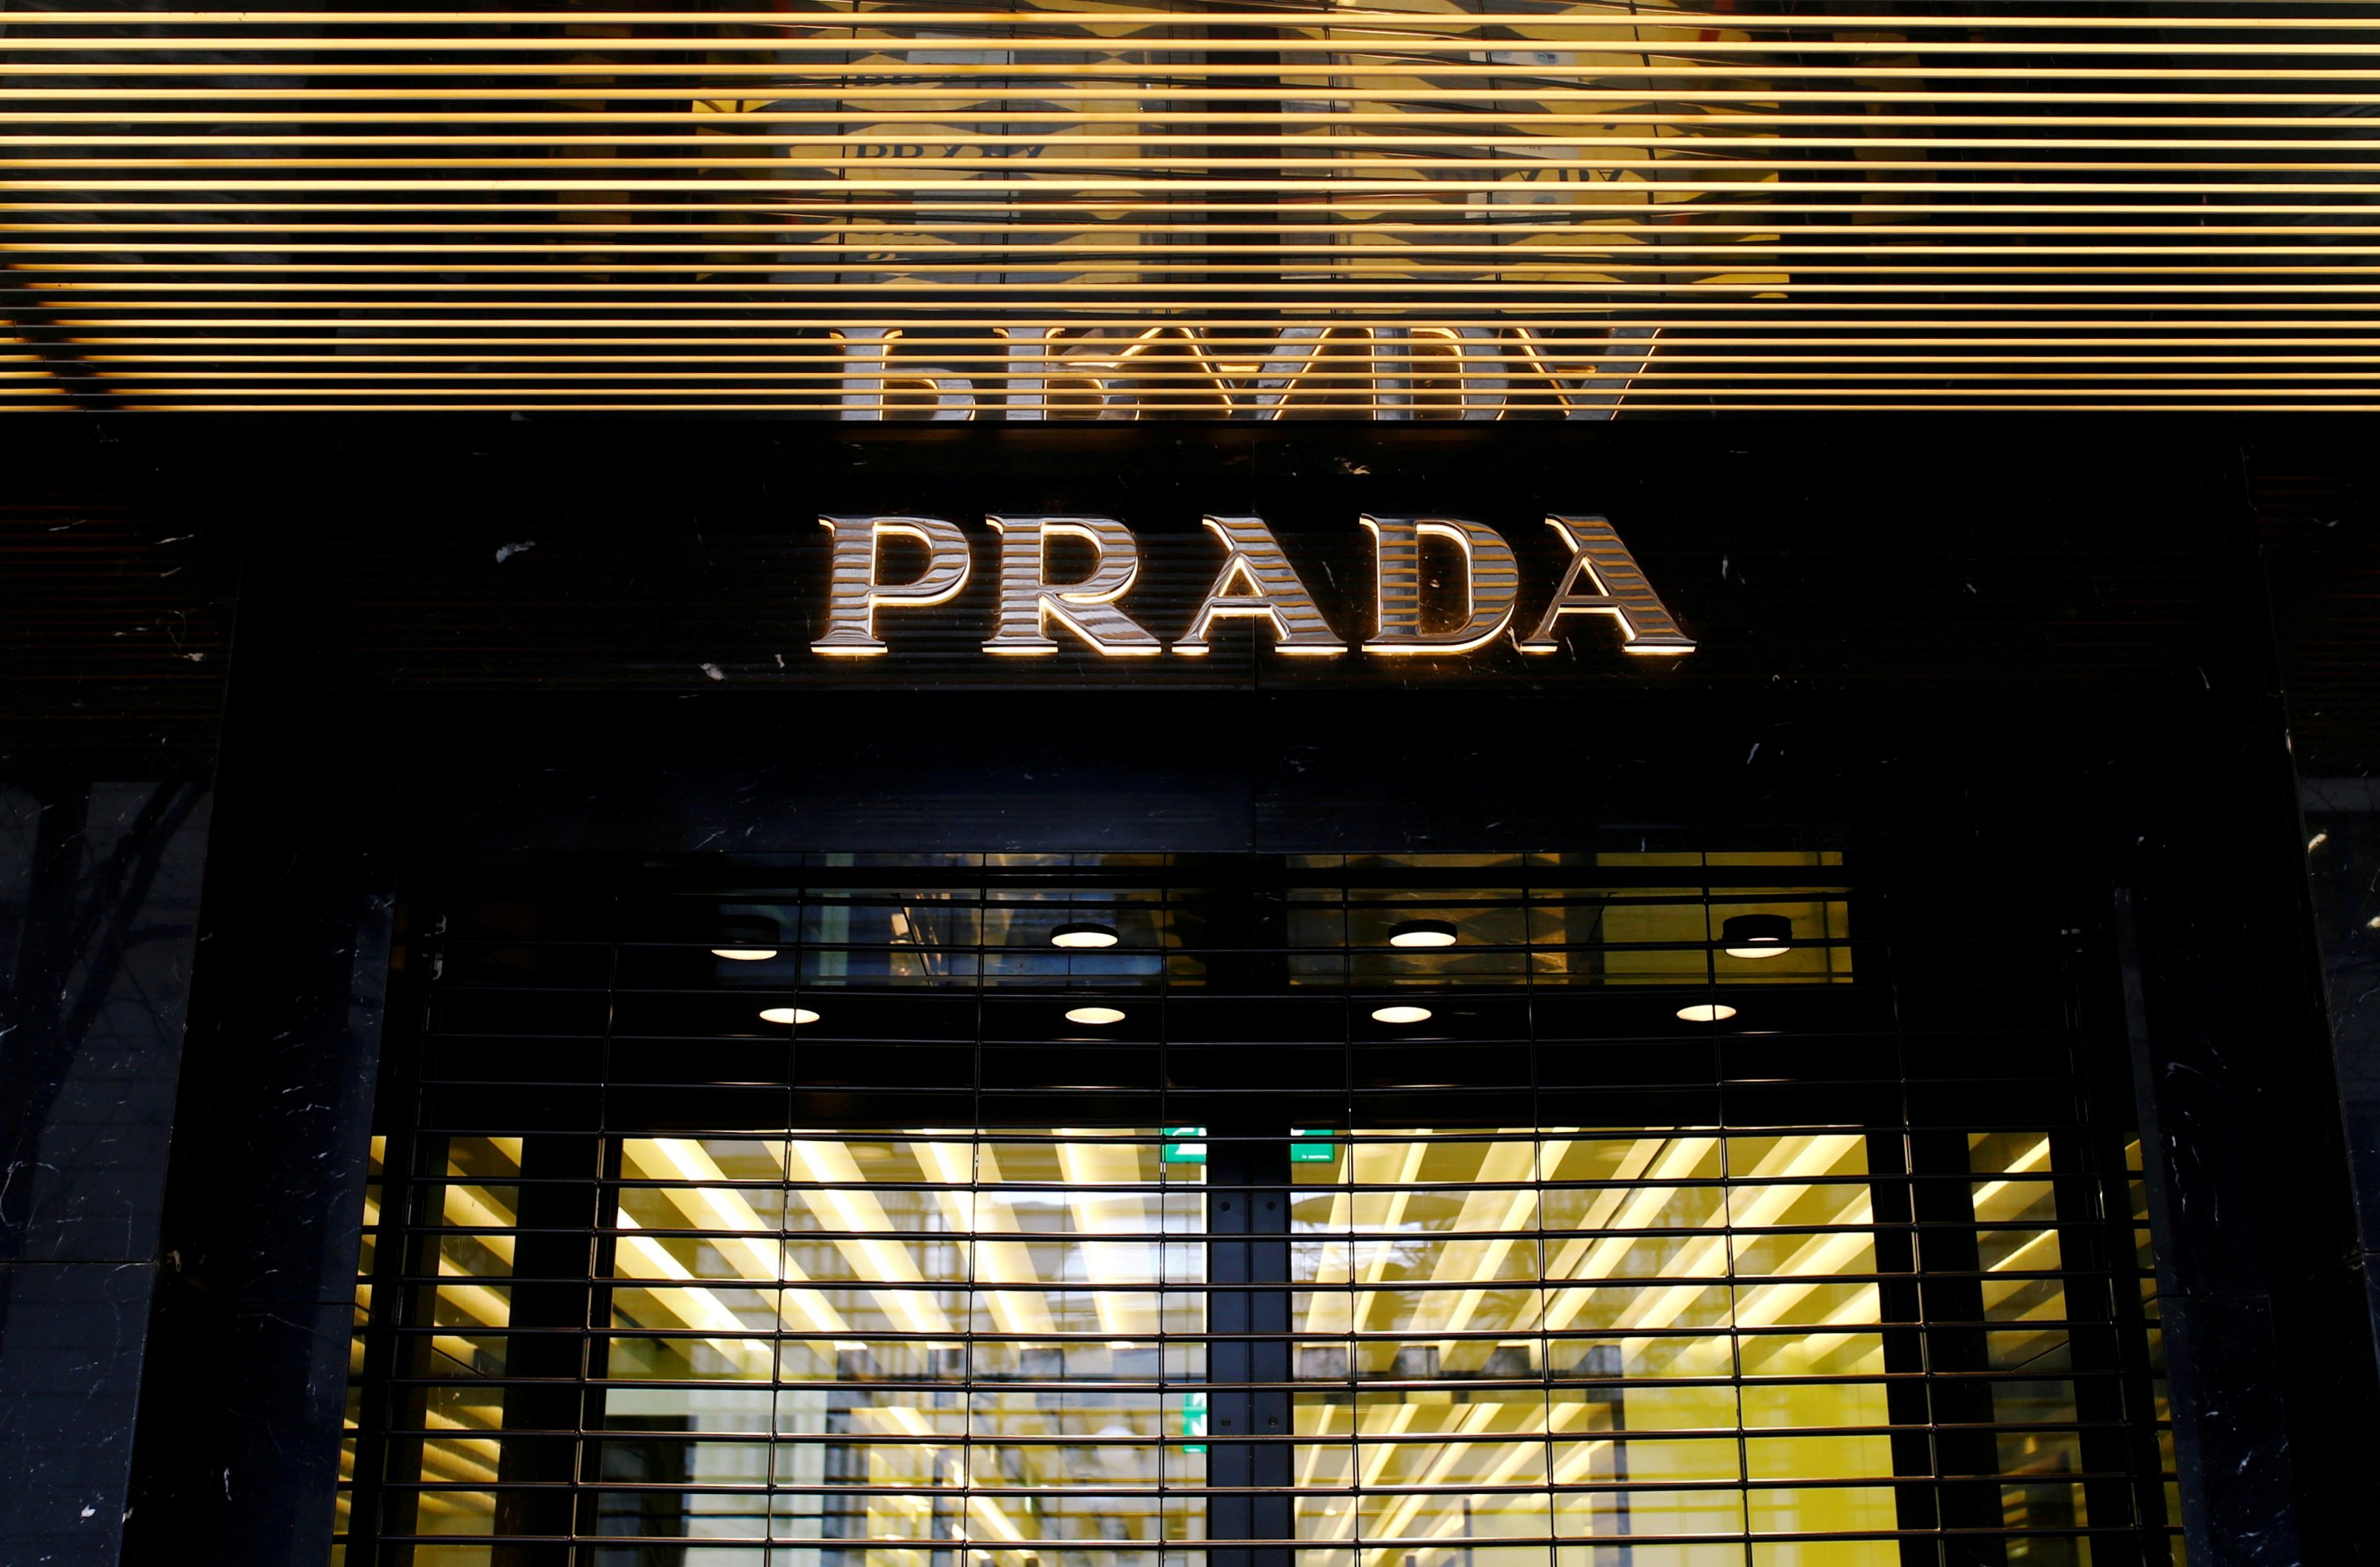 The company's logo is seen at a Prada store, which is closed during a partial lockdown, as the spread of the coronavirus disease (COVID-19) continues, in Zurich, Switzerland, Jan. 25, 2021. (Reuters Photo)